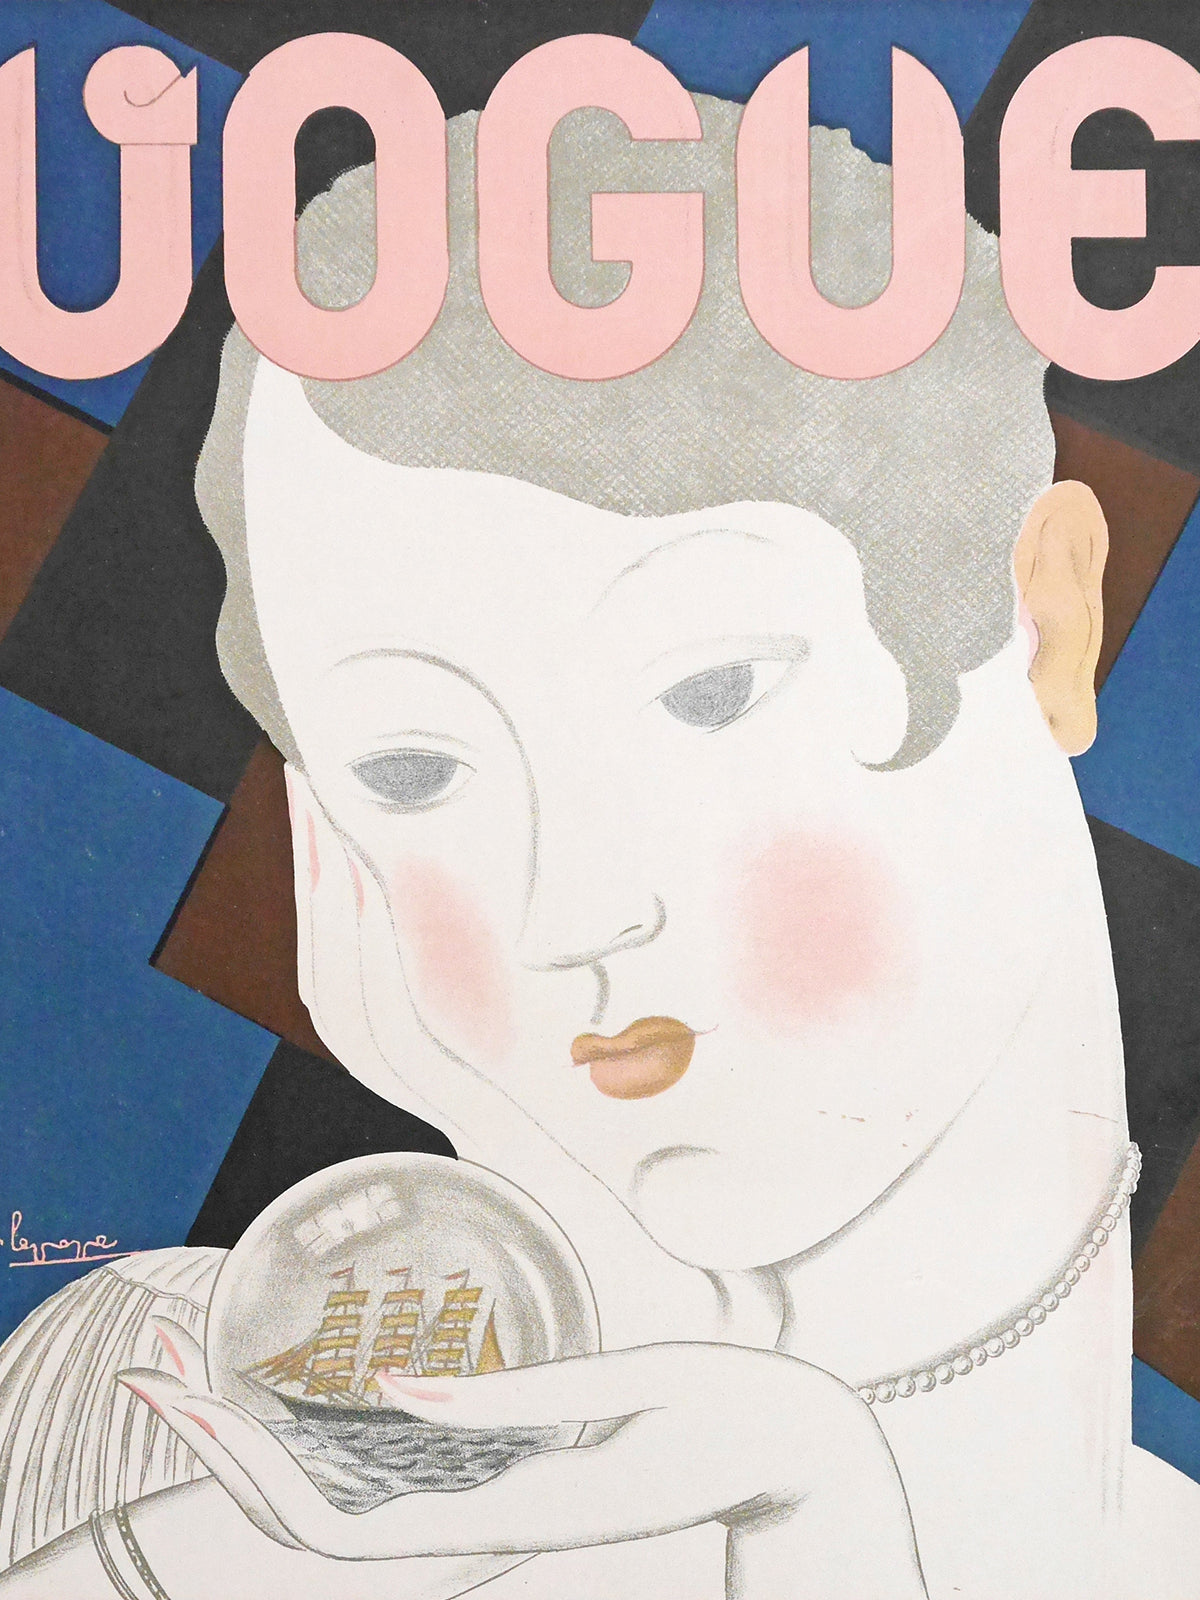 VOGUE Germany c. 1928 Advertising Poster Artwork by Georges Lepape